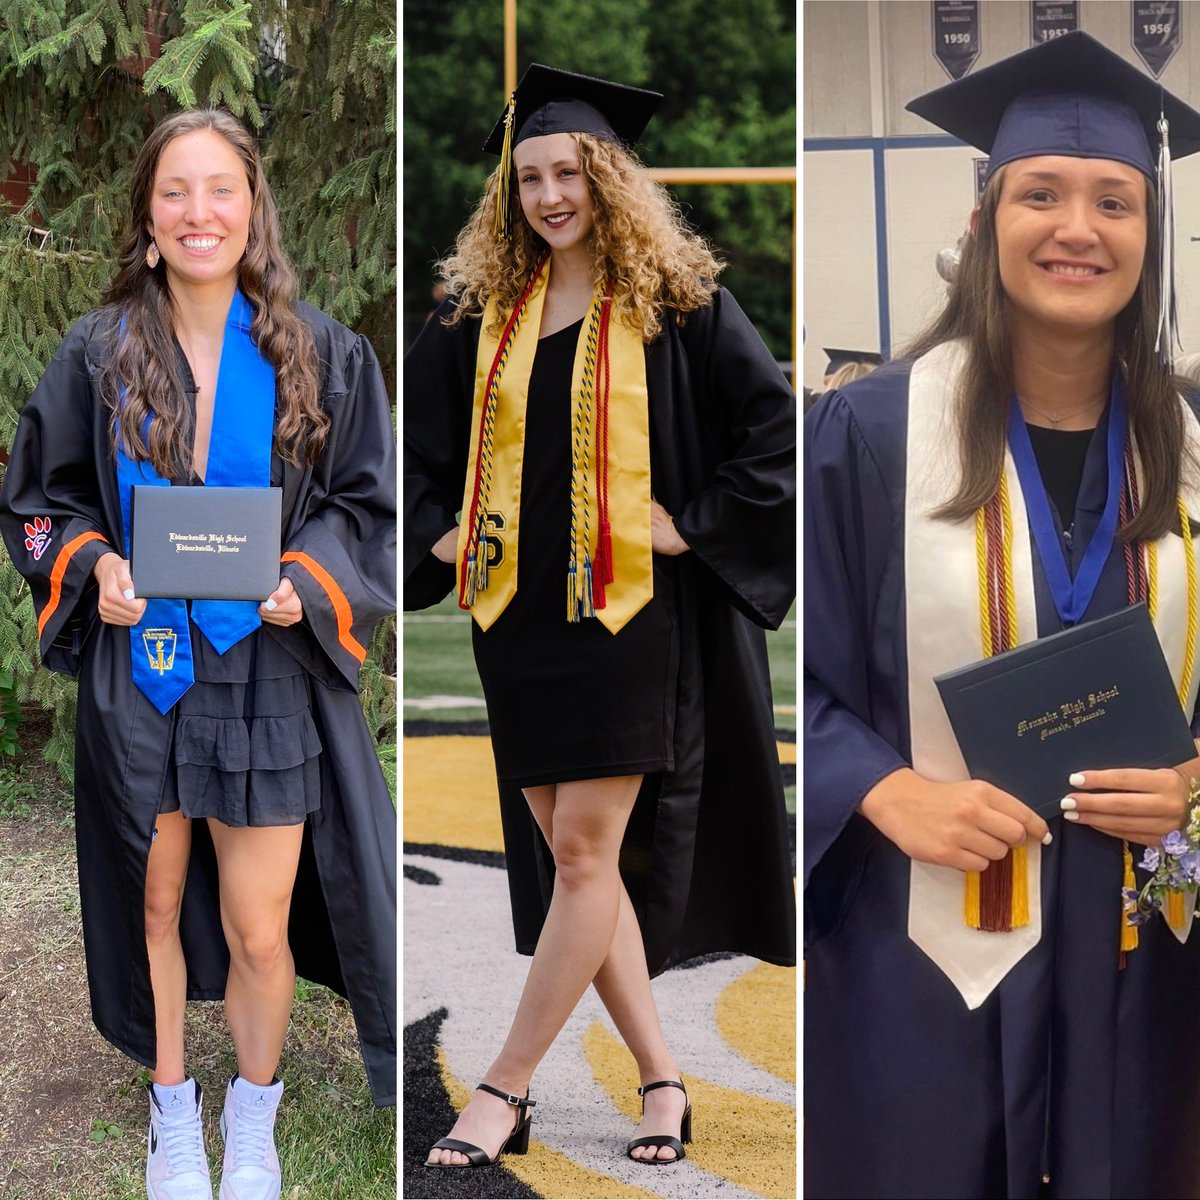 Congratulations to our incoming freshmen, Emerson, Abigail & Mara on your recent high school graduations! We are so PROUD of everything you have accomplished🎓🔱🎉👏